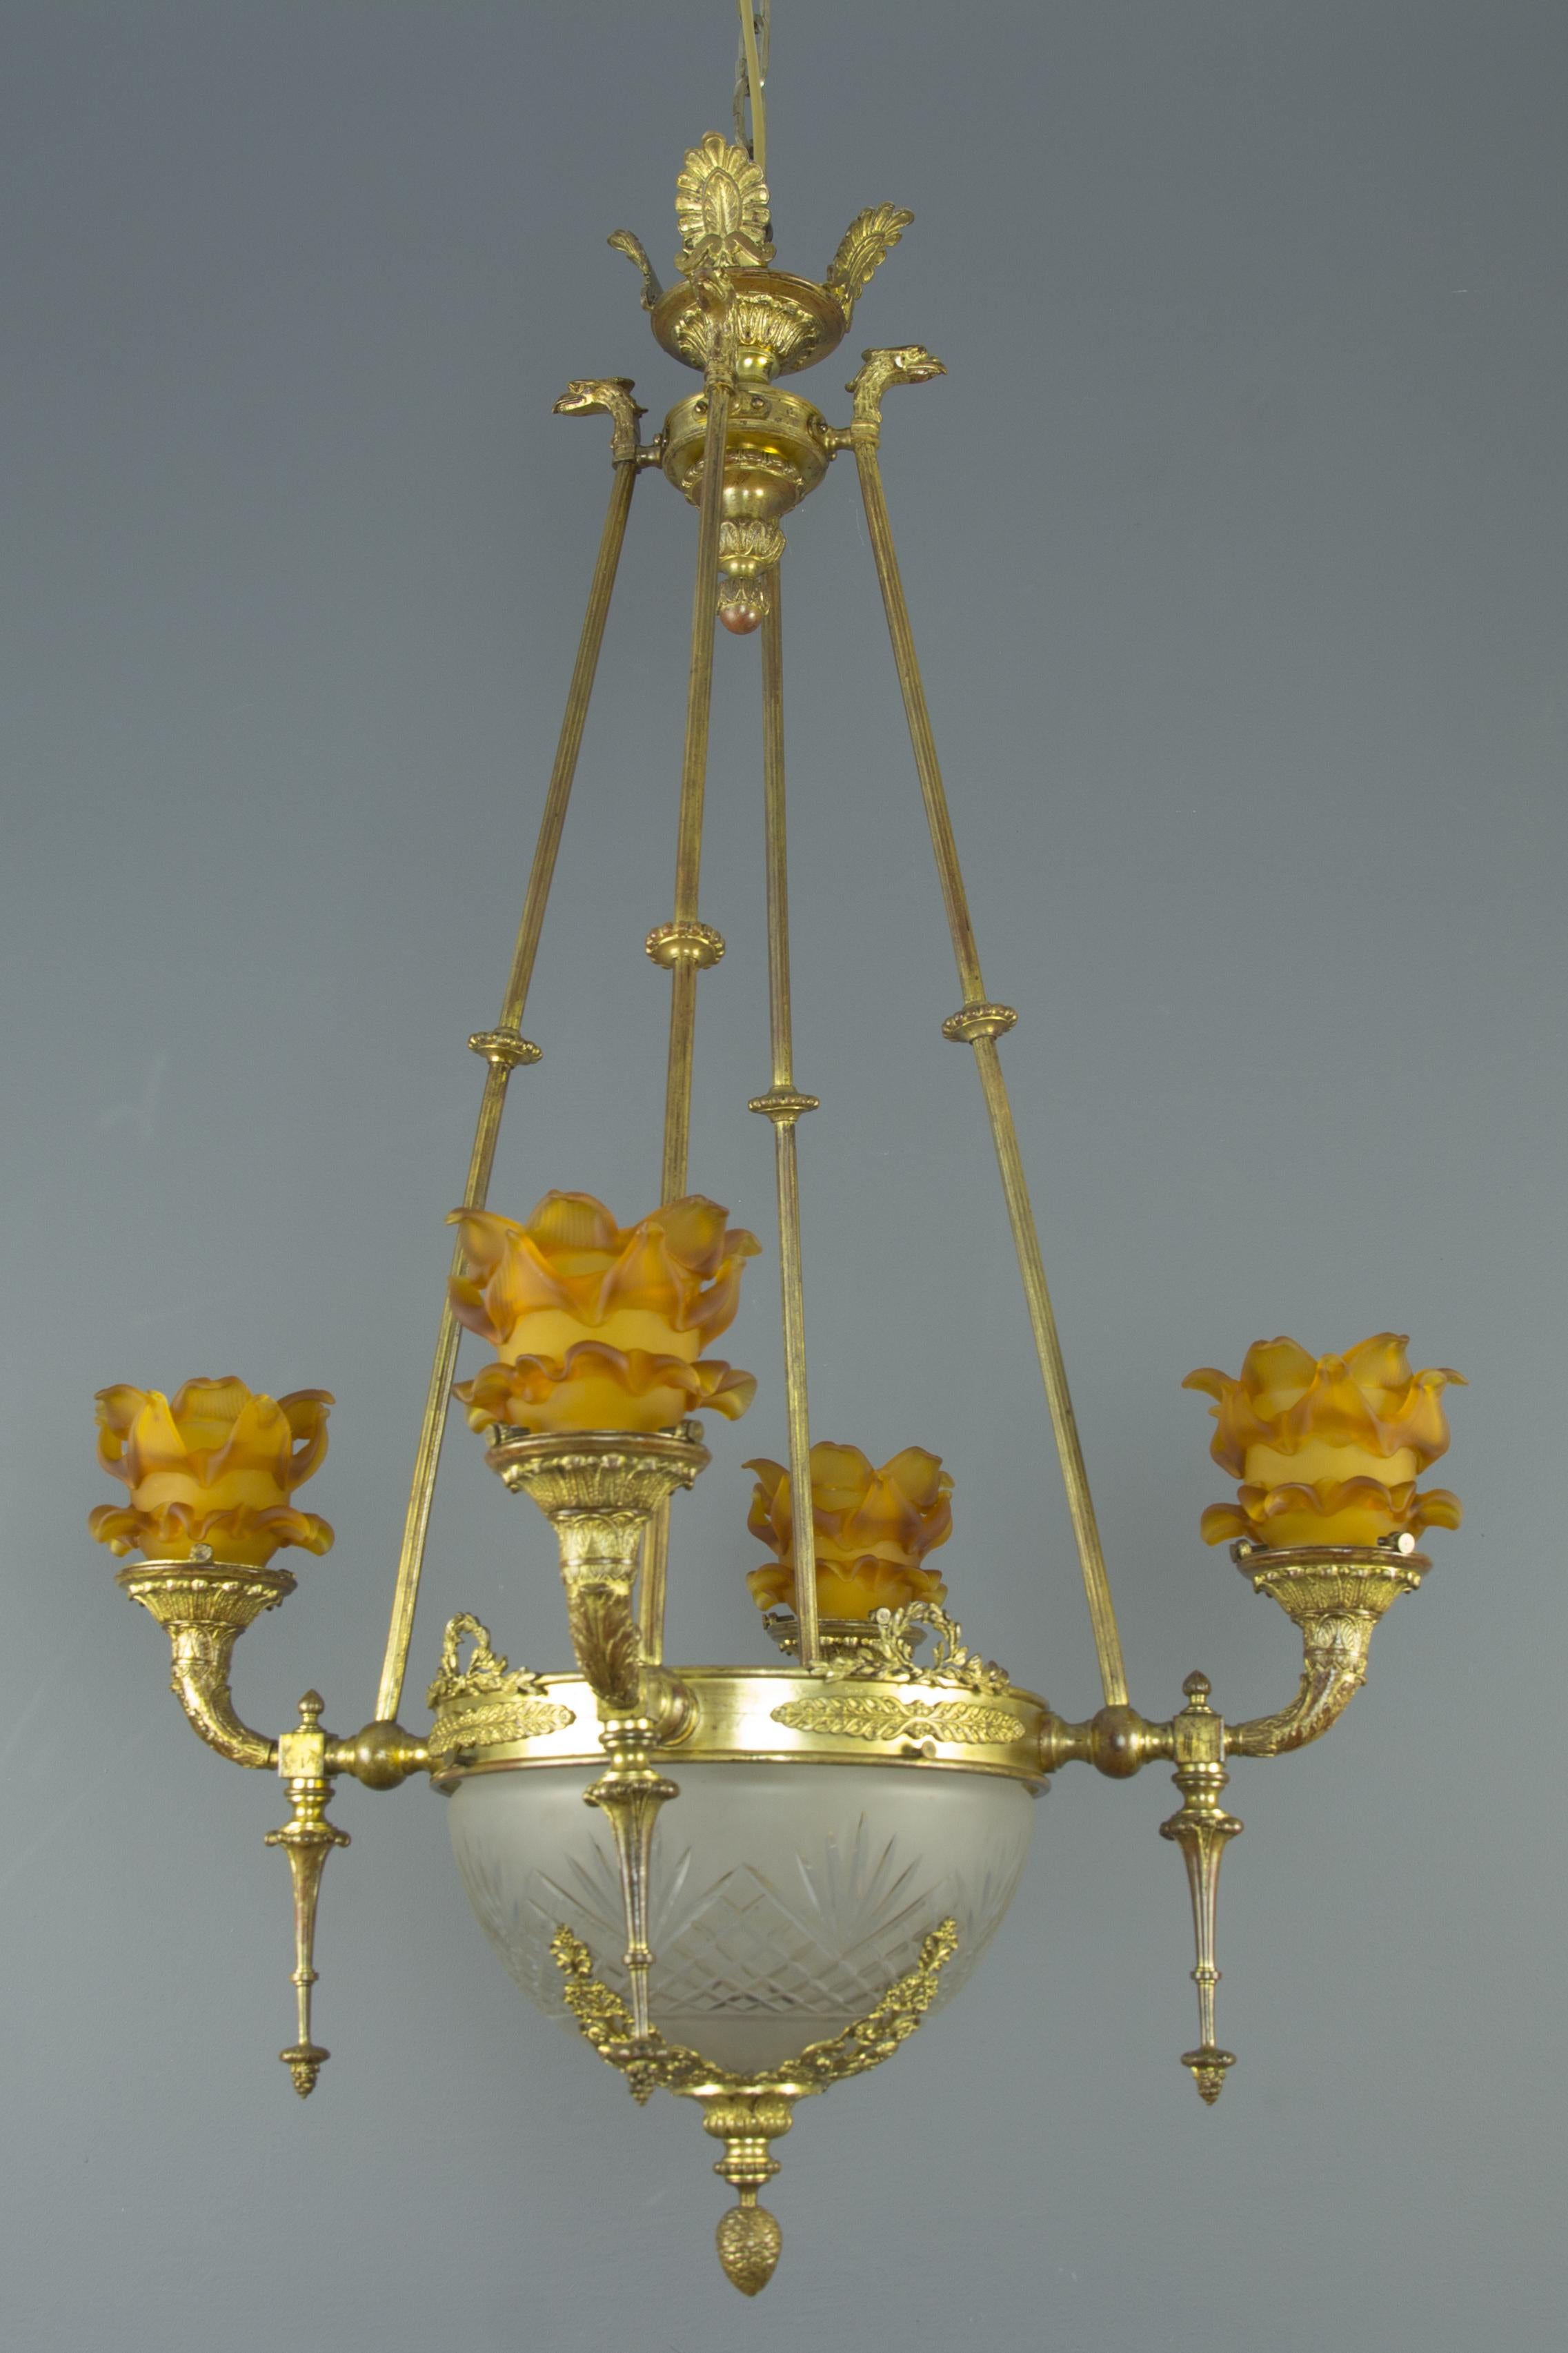 Stunning Empire style eight–light chandelier, surmounted by bronze corona with lotus palmettes. Four branches with griffin heads on top are supporting the central circular ring, decorated with palmettes and laurel wreathes. Four bronze branches,